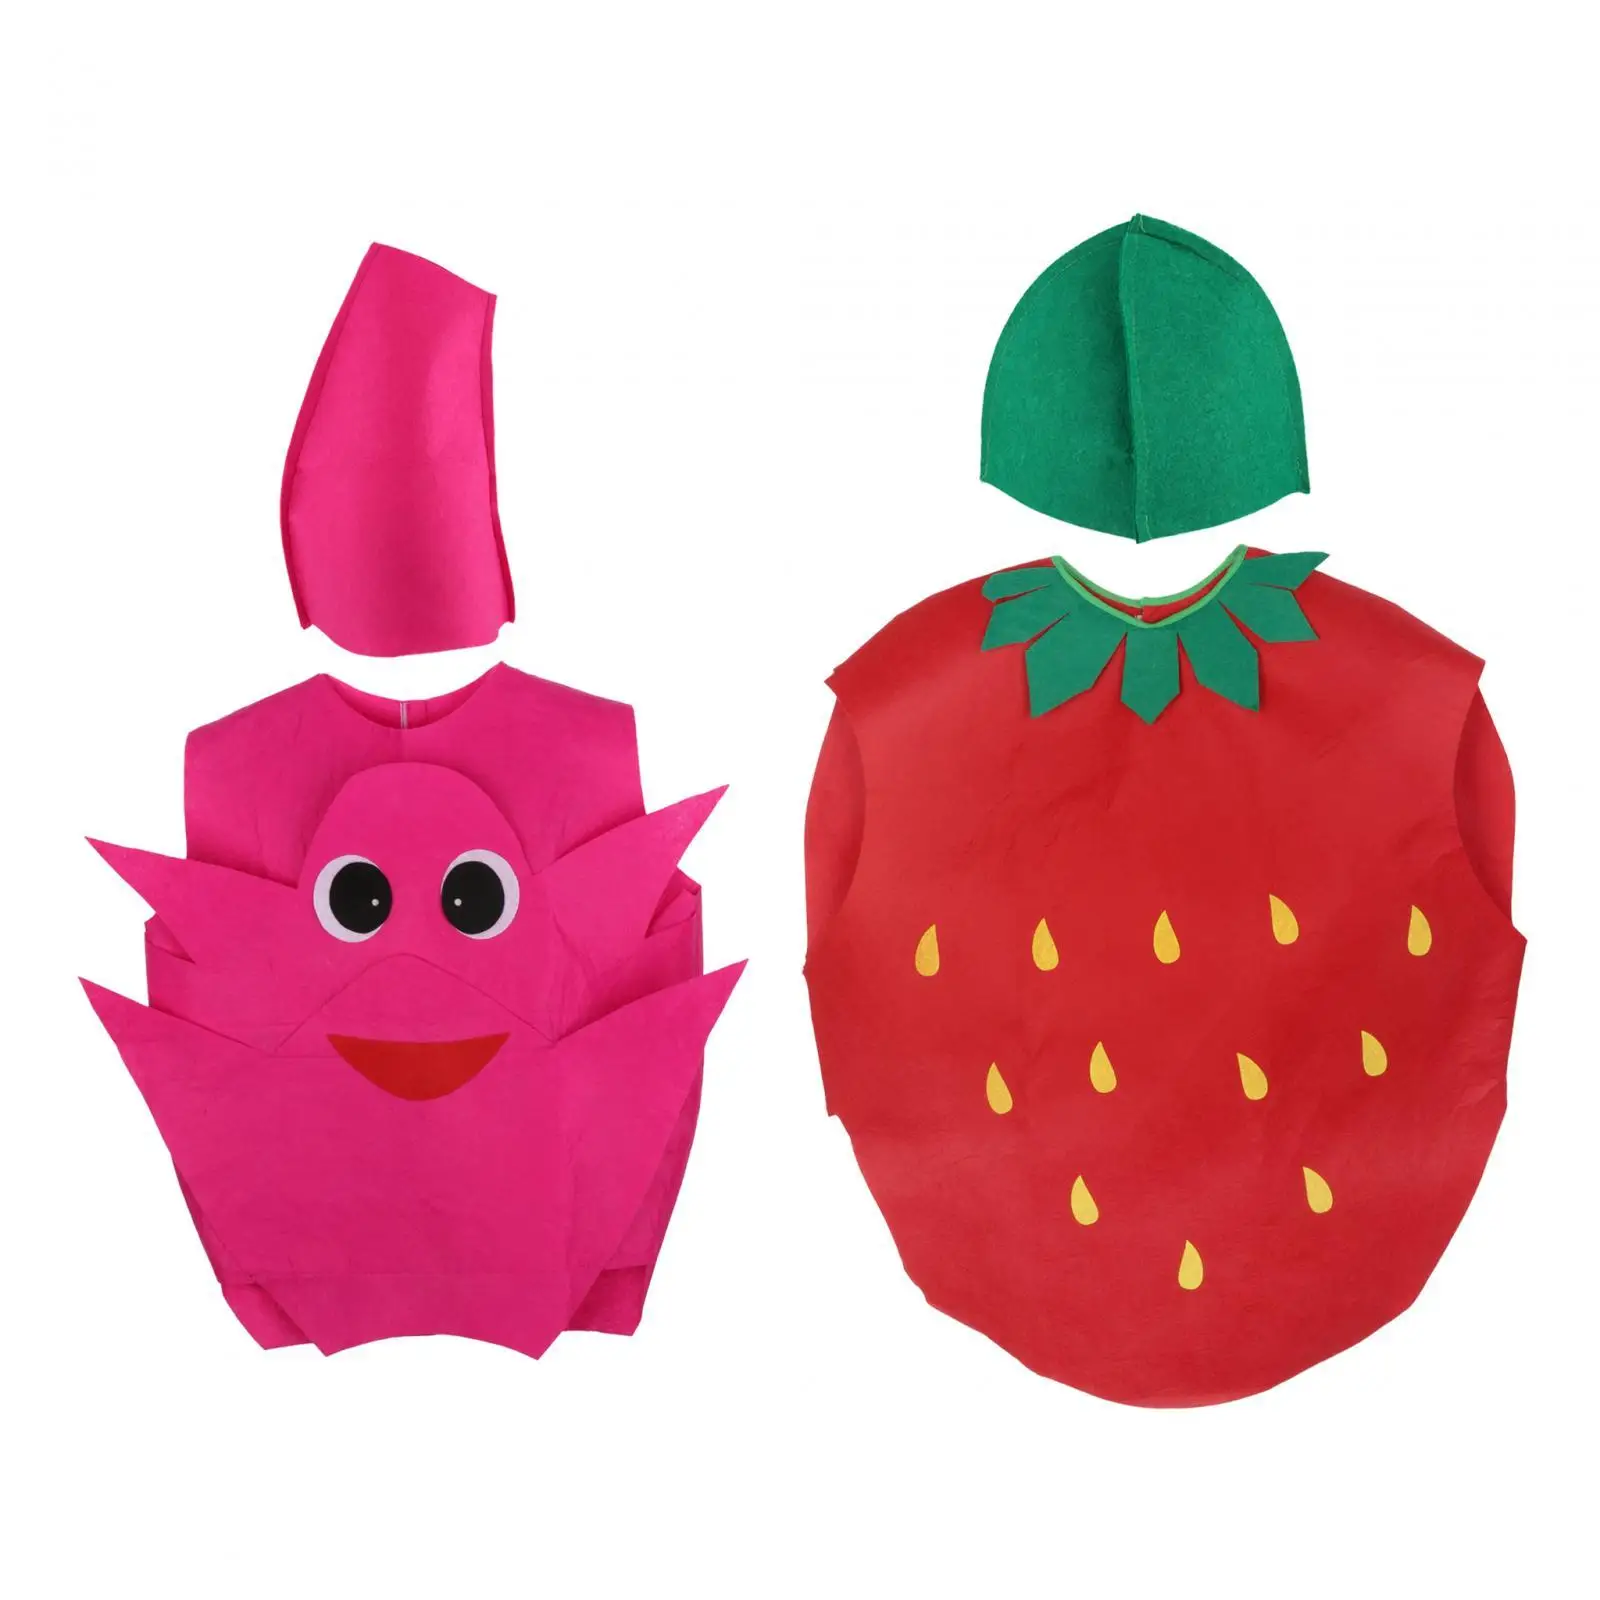 

Funny Fruit Costume Cute Decorative Creative Dress up with Hat for Holidays Themed Party Fancy Dress Carnivals Halloween Props